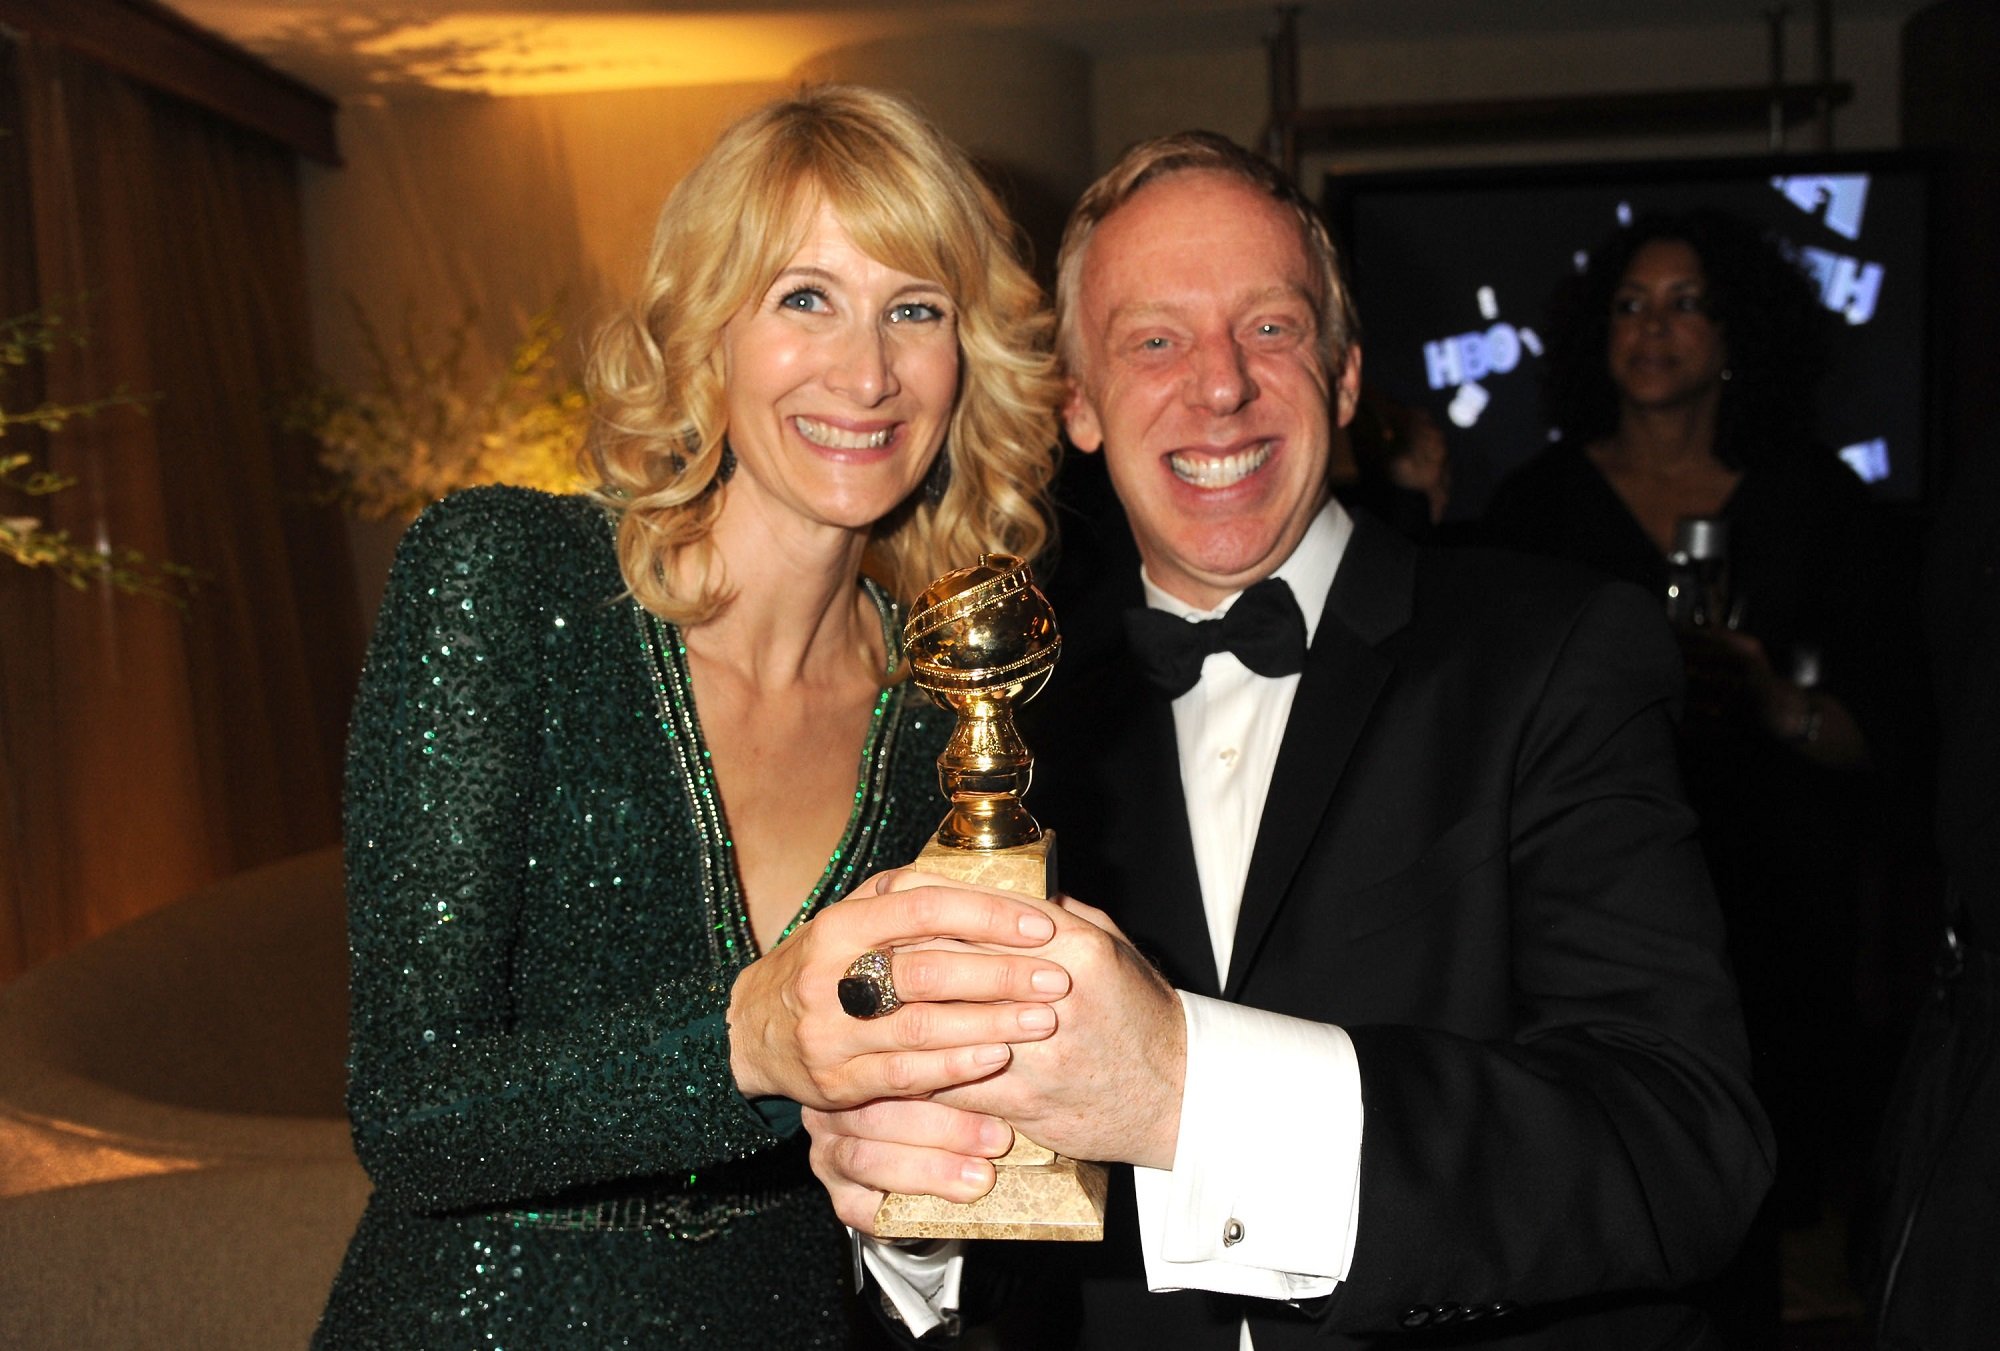 Laura Dern with 'The White Lotus' creator Mike White holding a Golden Globe award trophy